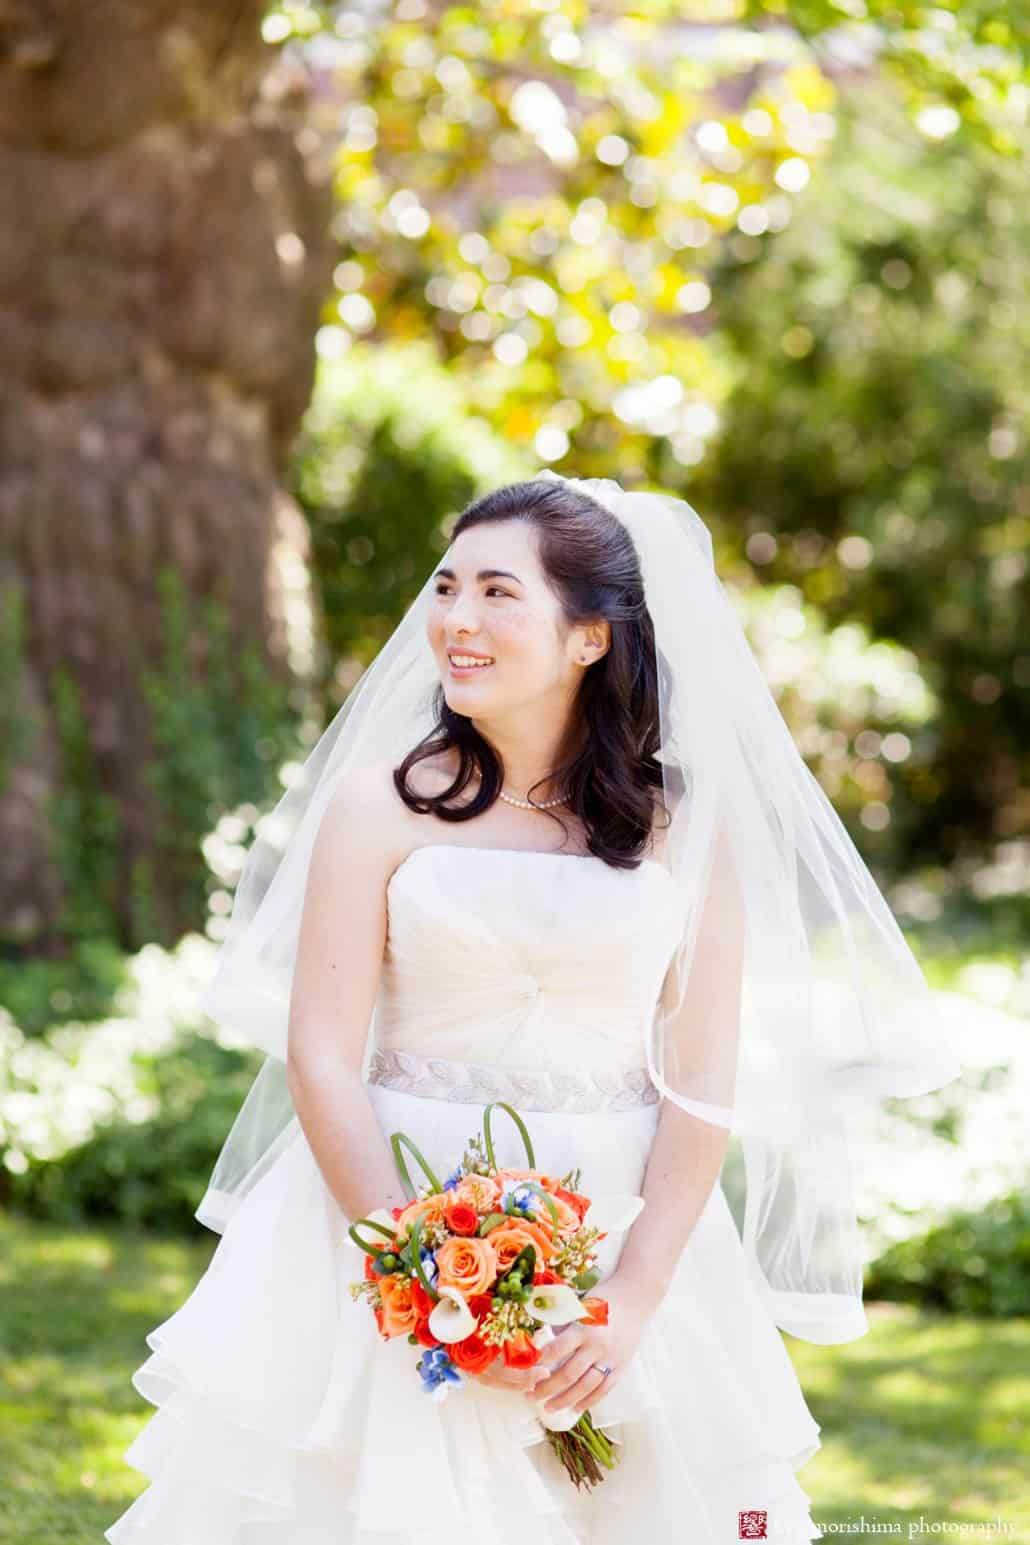 Princeton bridal portrait at Cap and Gown Club; bride wears Vatana Watters and carries Whole Foods wedding bouquet; photographed by Kyo Morishima